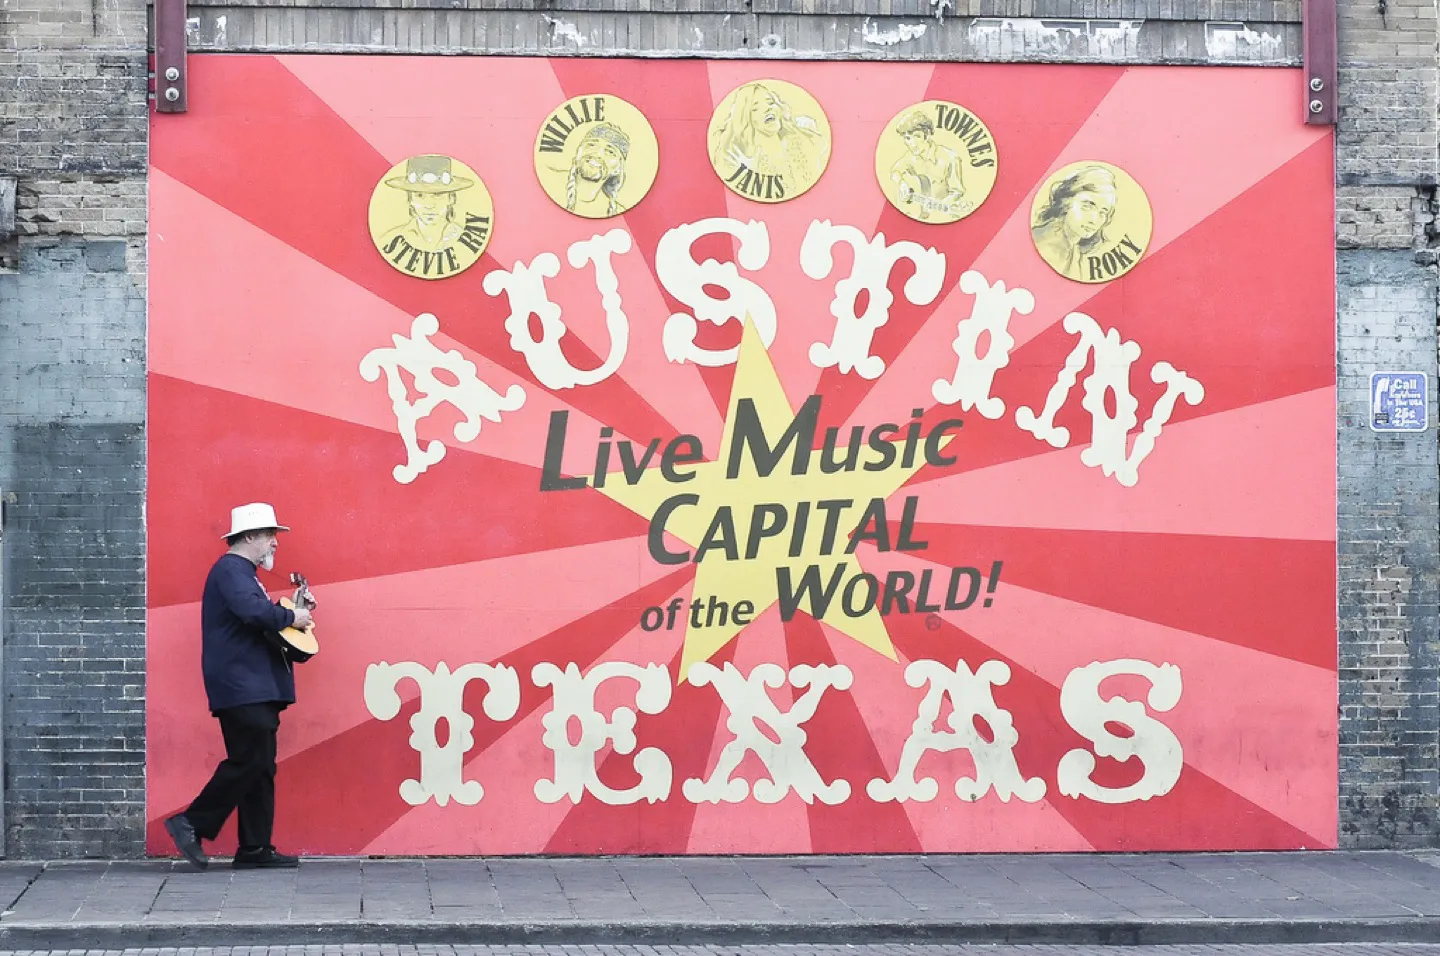 Experience the live music capital of the world with a visit to Austin for the USA F1 Grand Prix